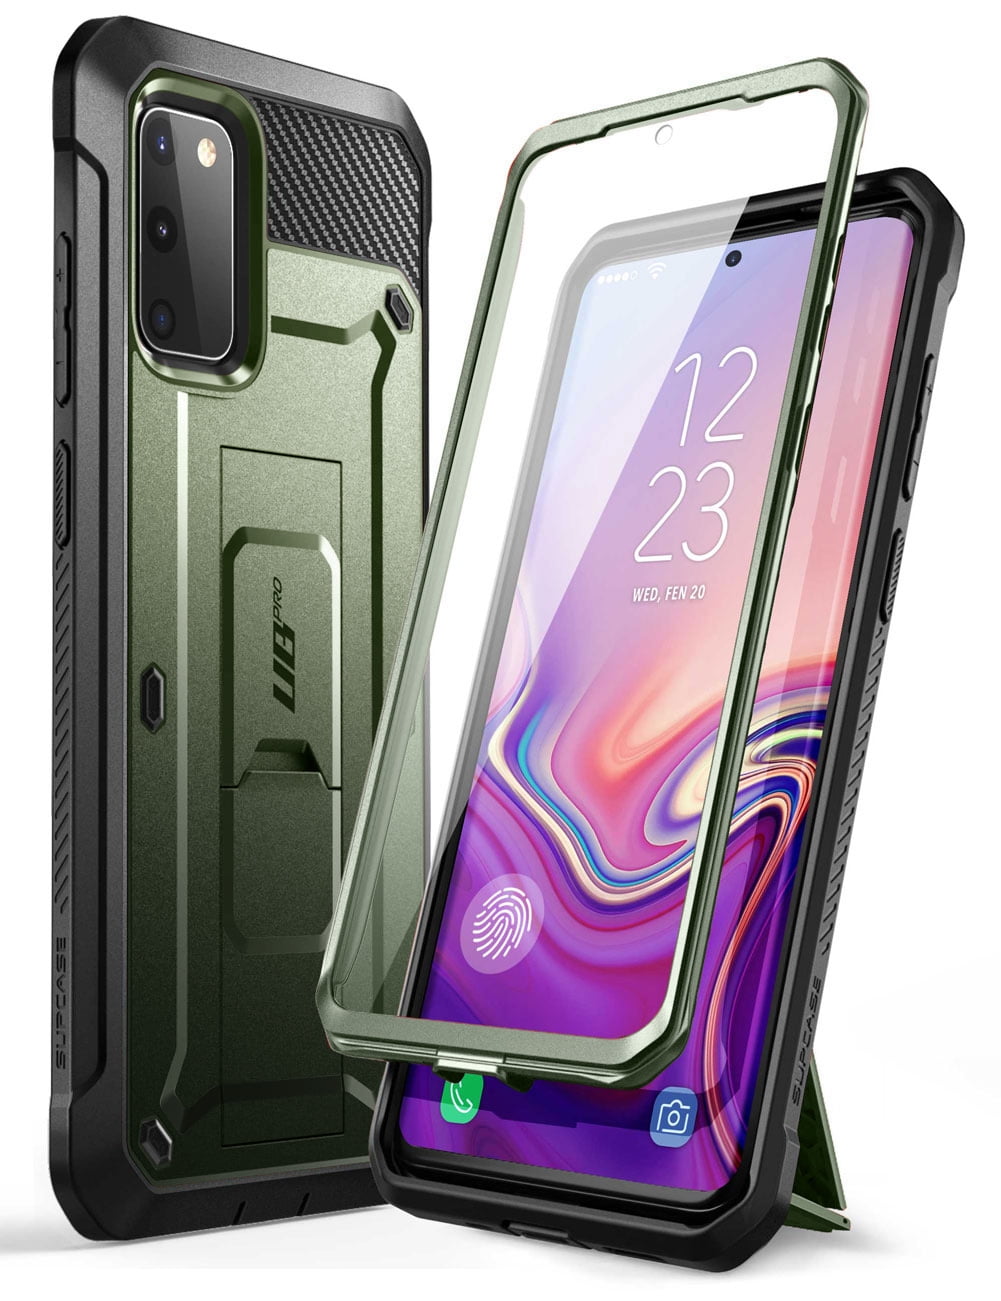 SUPCASE Unicorn Beetle Pro Series Designed for Samsung Galaxy S20 FE 5G Case (2020), Full-Body Dual Layer Rugged Holster & Kickstand Case with Built-in Screen Protector (Guldan)